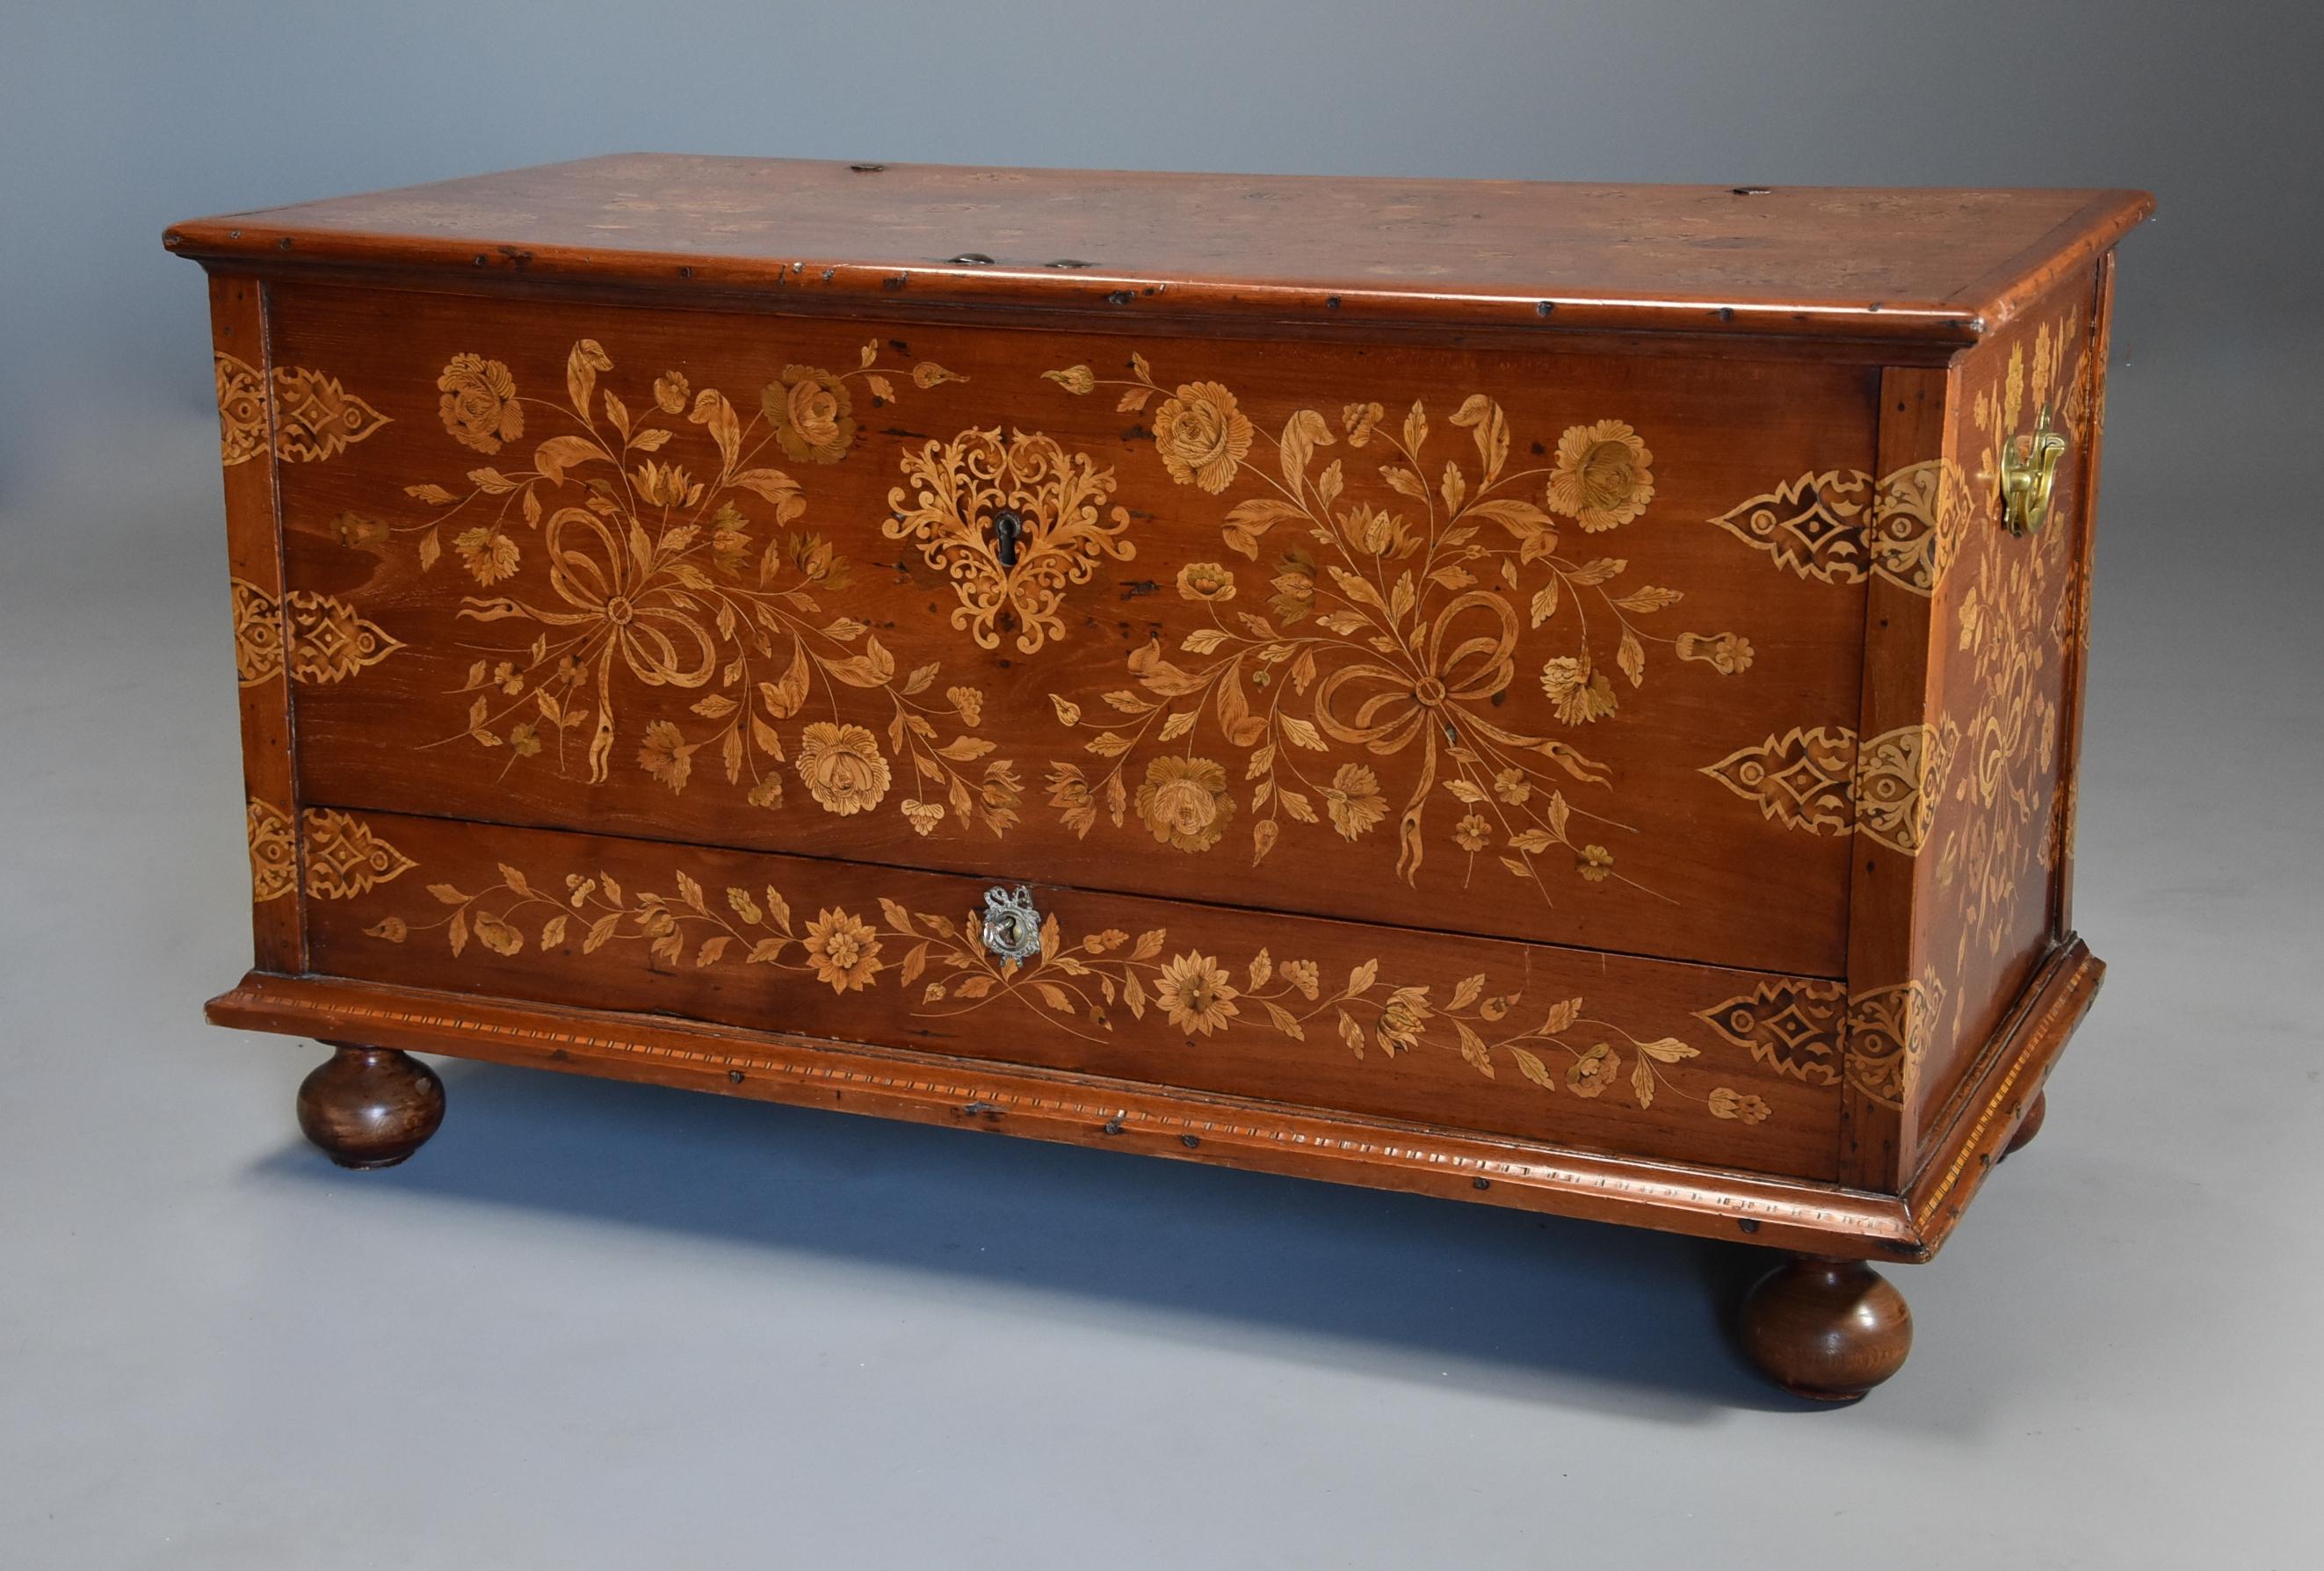 A rare superb quality mid 19th century highly decorative Continental floral marquetry teak chest, possibly Dutch.

This chest consists of a solid teak top with fine floral marquetry design with inlaid ribbon and other decoration with original